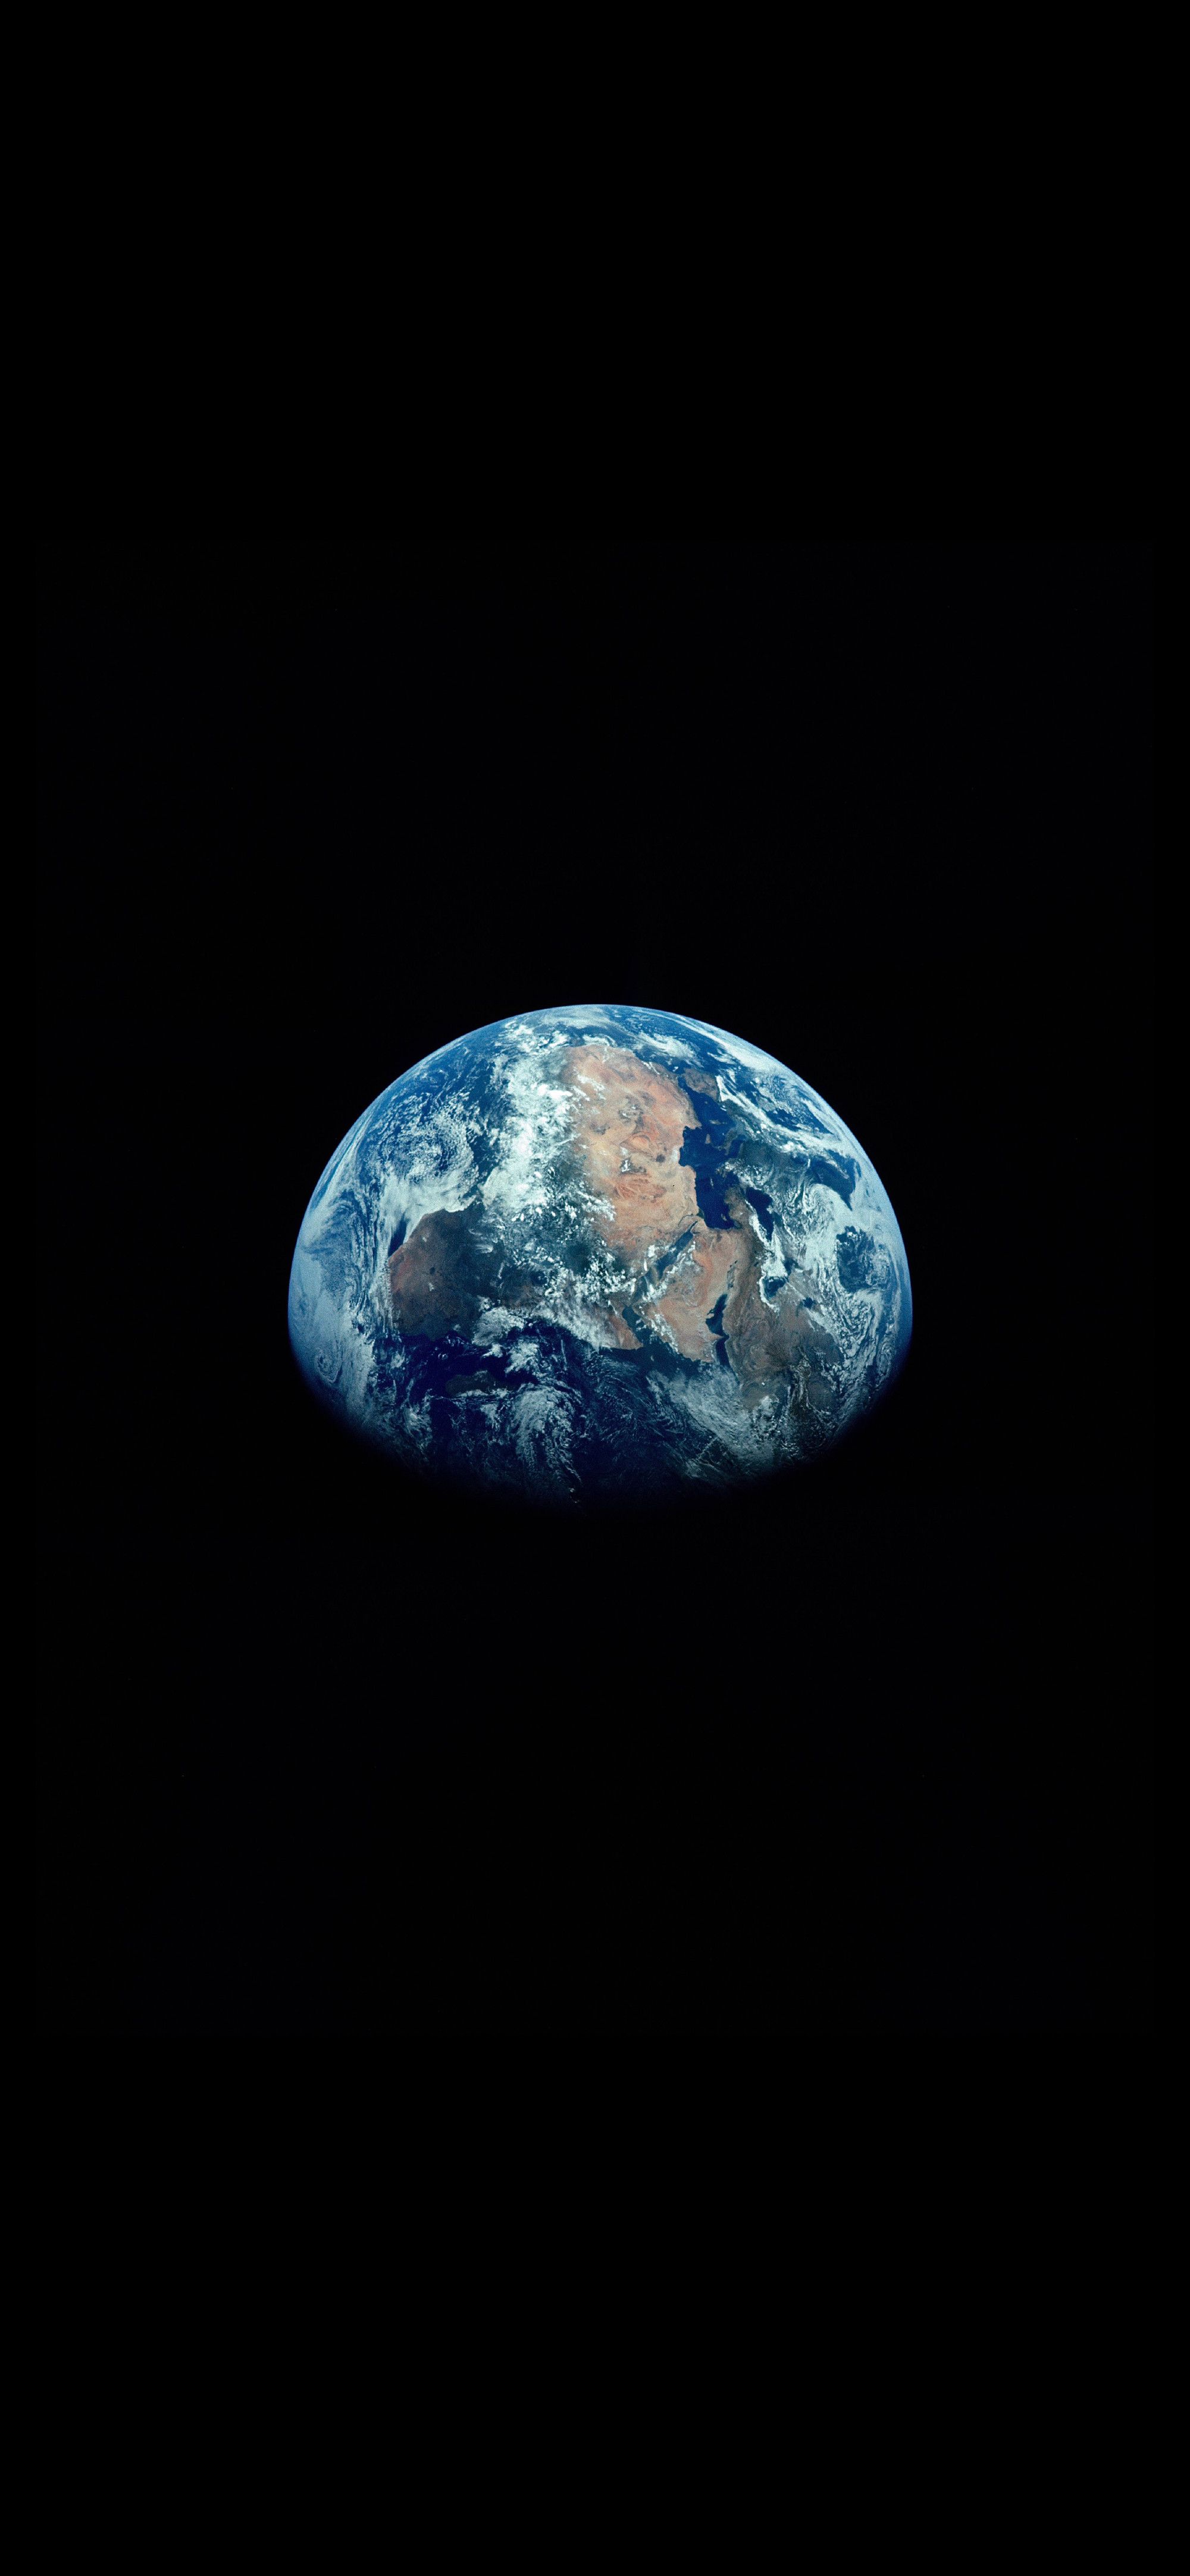 Earth from Apollo 11 for OLED devices -Side note: doesn't seem flat to me